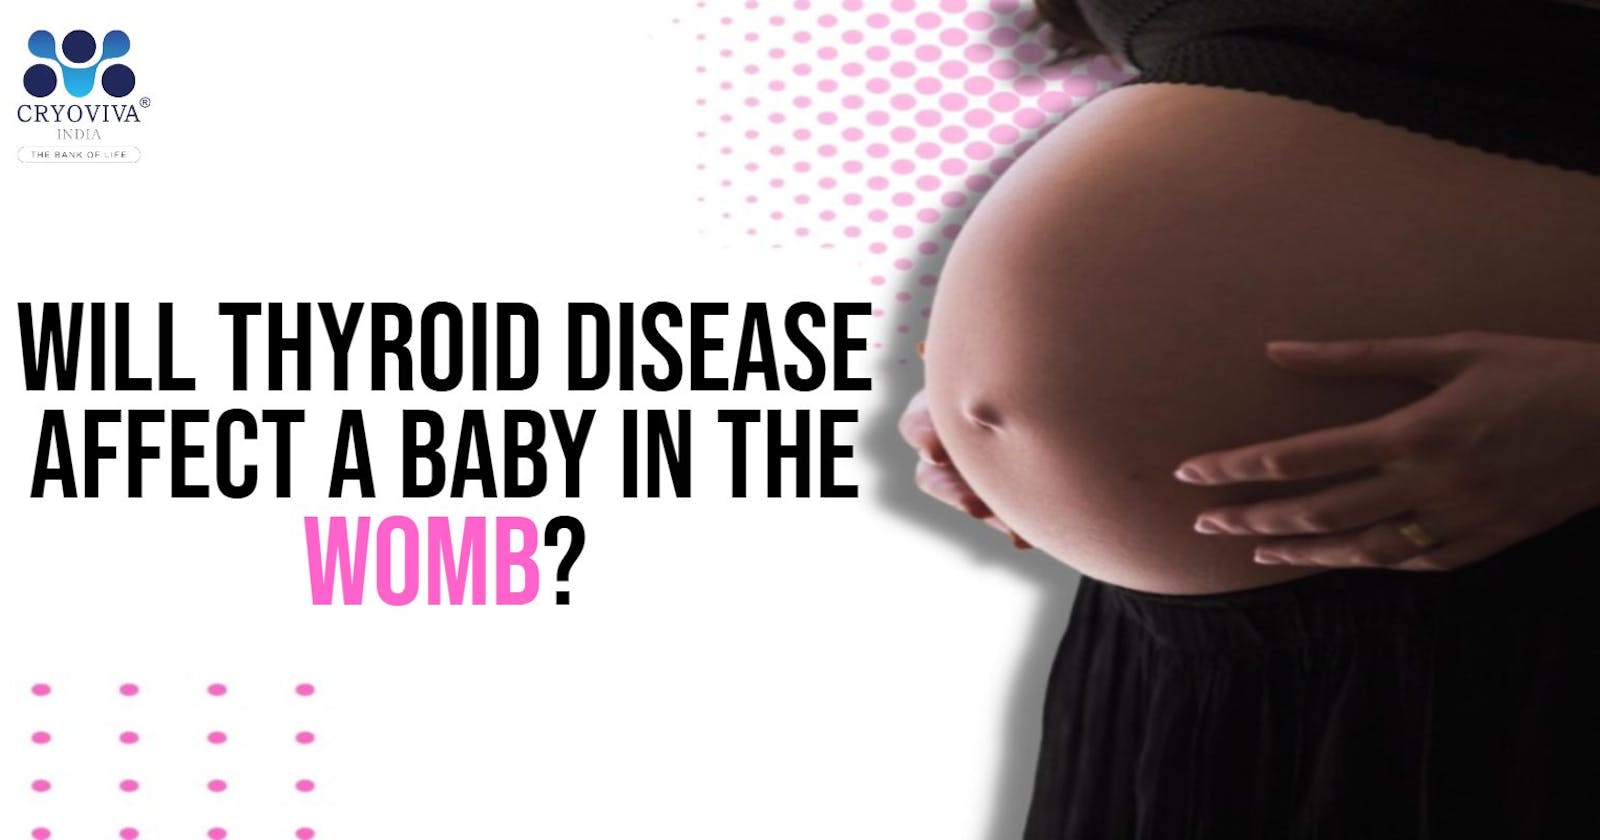 Will Thyroid Disease Affect a Baby in the Womb?